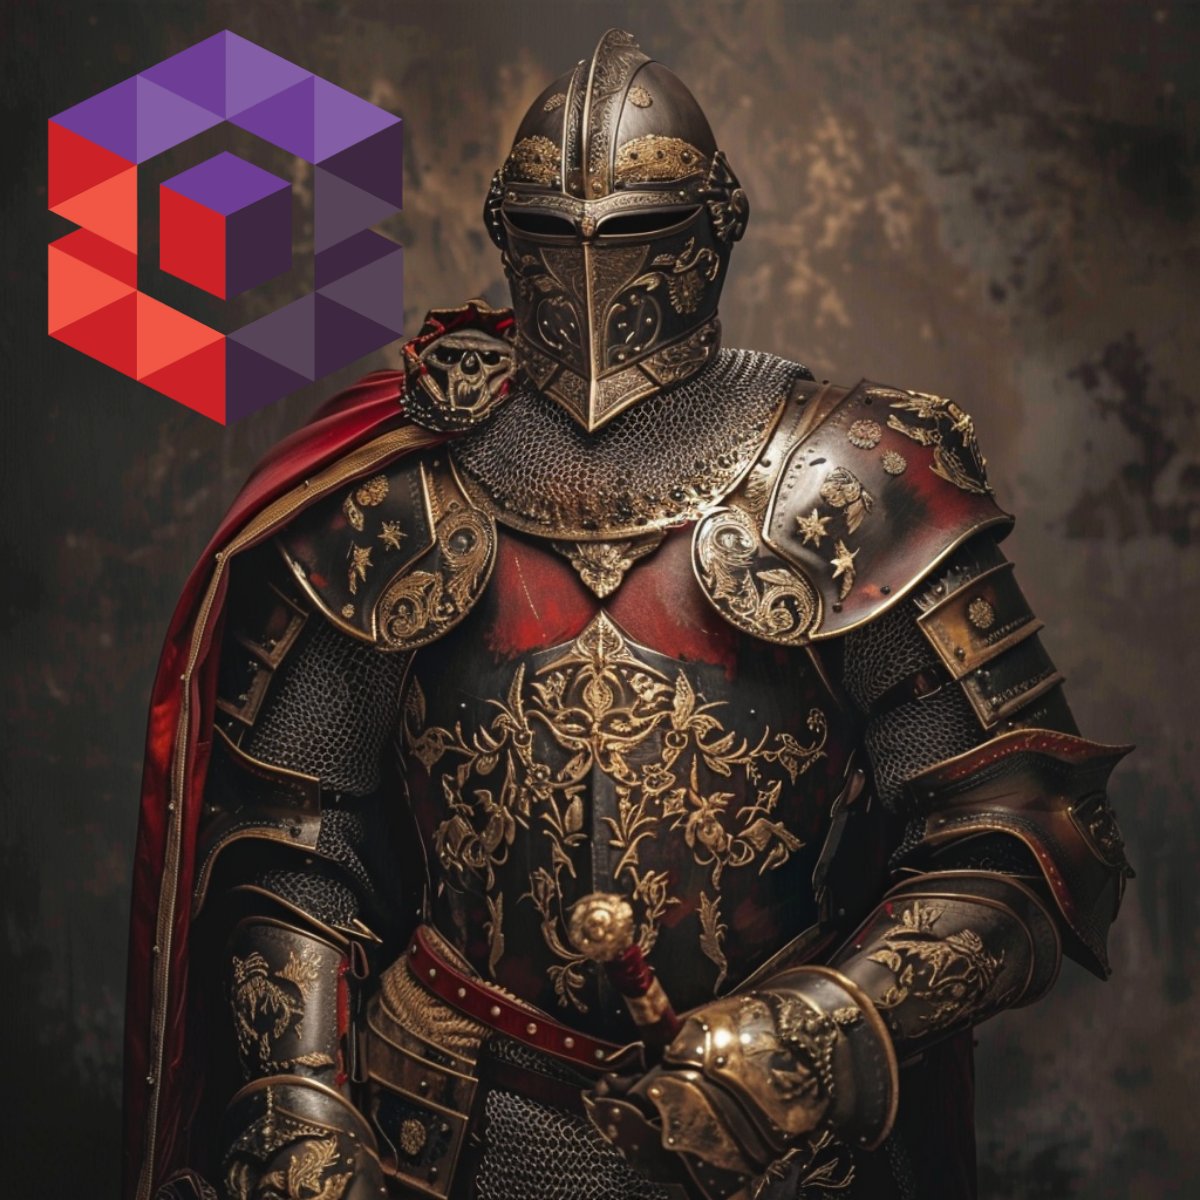 In the digital realm, Sotero is your armored knight, protecting your core assets: data. Against any cyber siege, we keep your treasures safe—like knights in digital armor.

bit.ly/49vdmec
#ransomwaresolution #ransomwareprevention